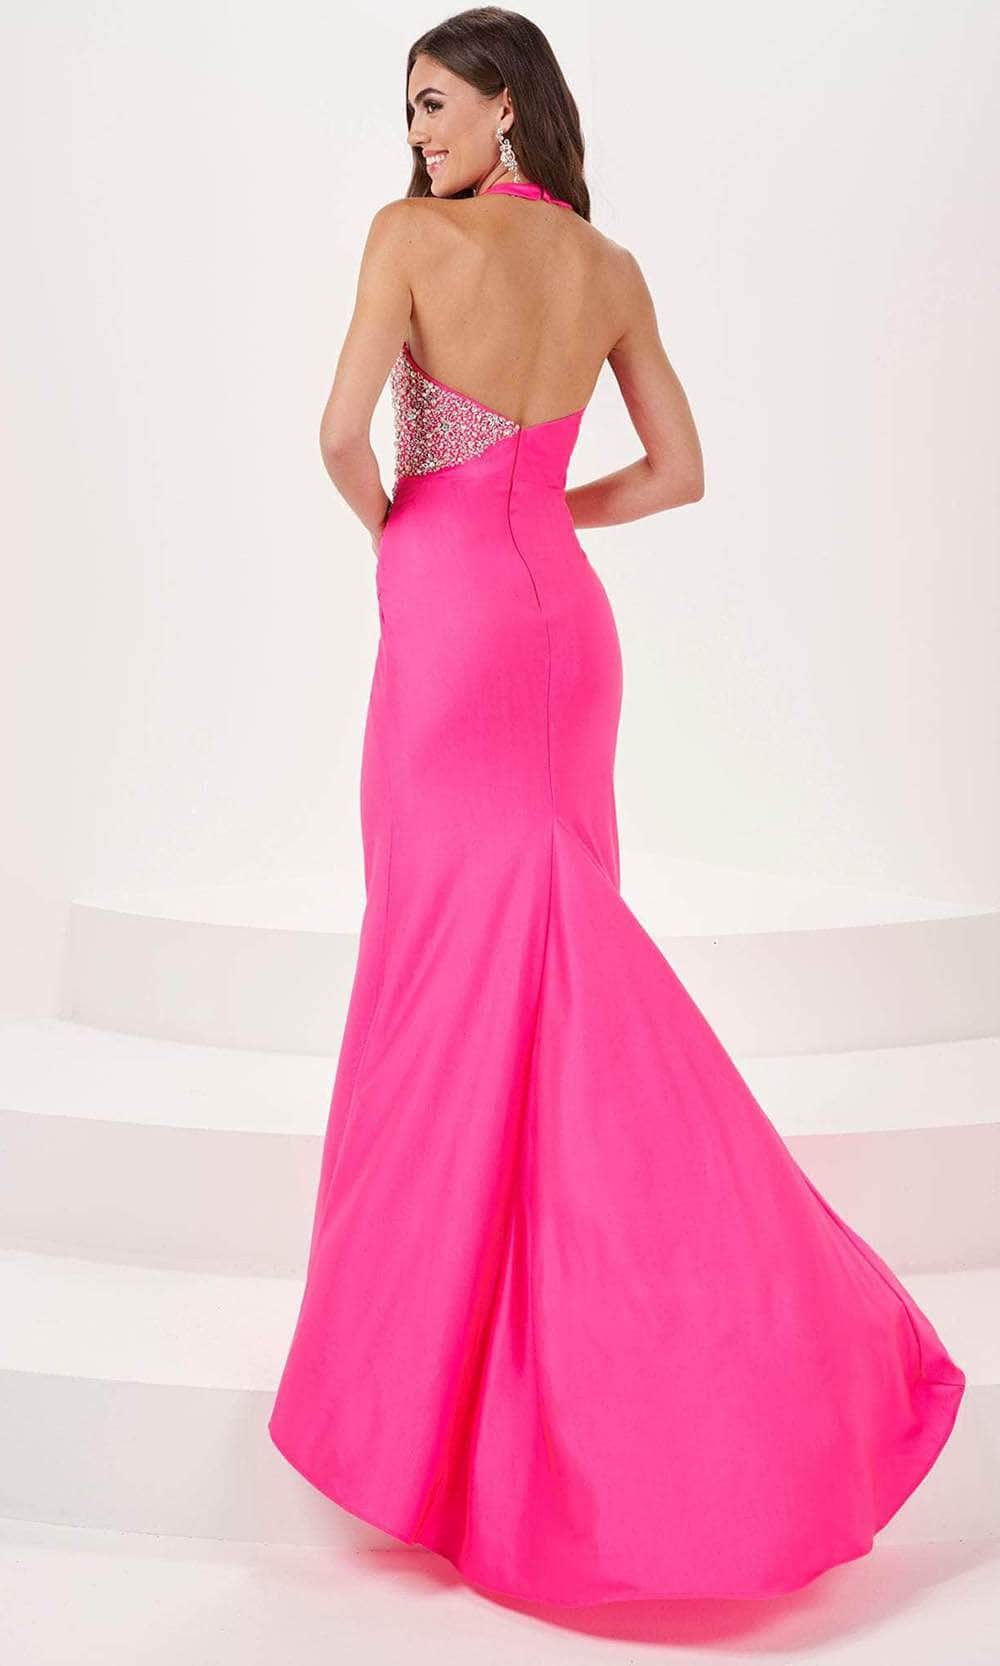 Panoply 14175 - Sweetheart Evening Gown with Slit Evening Dresses